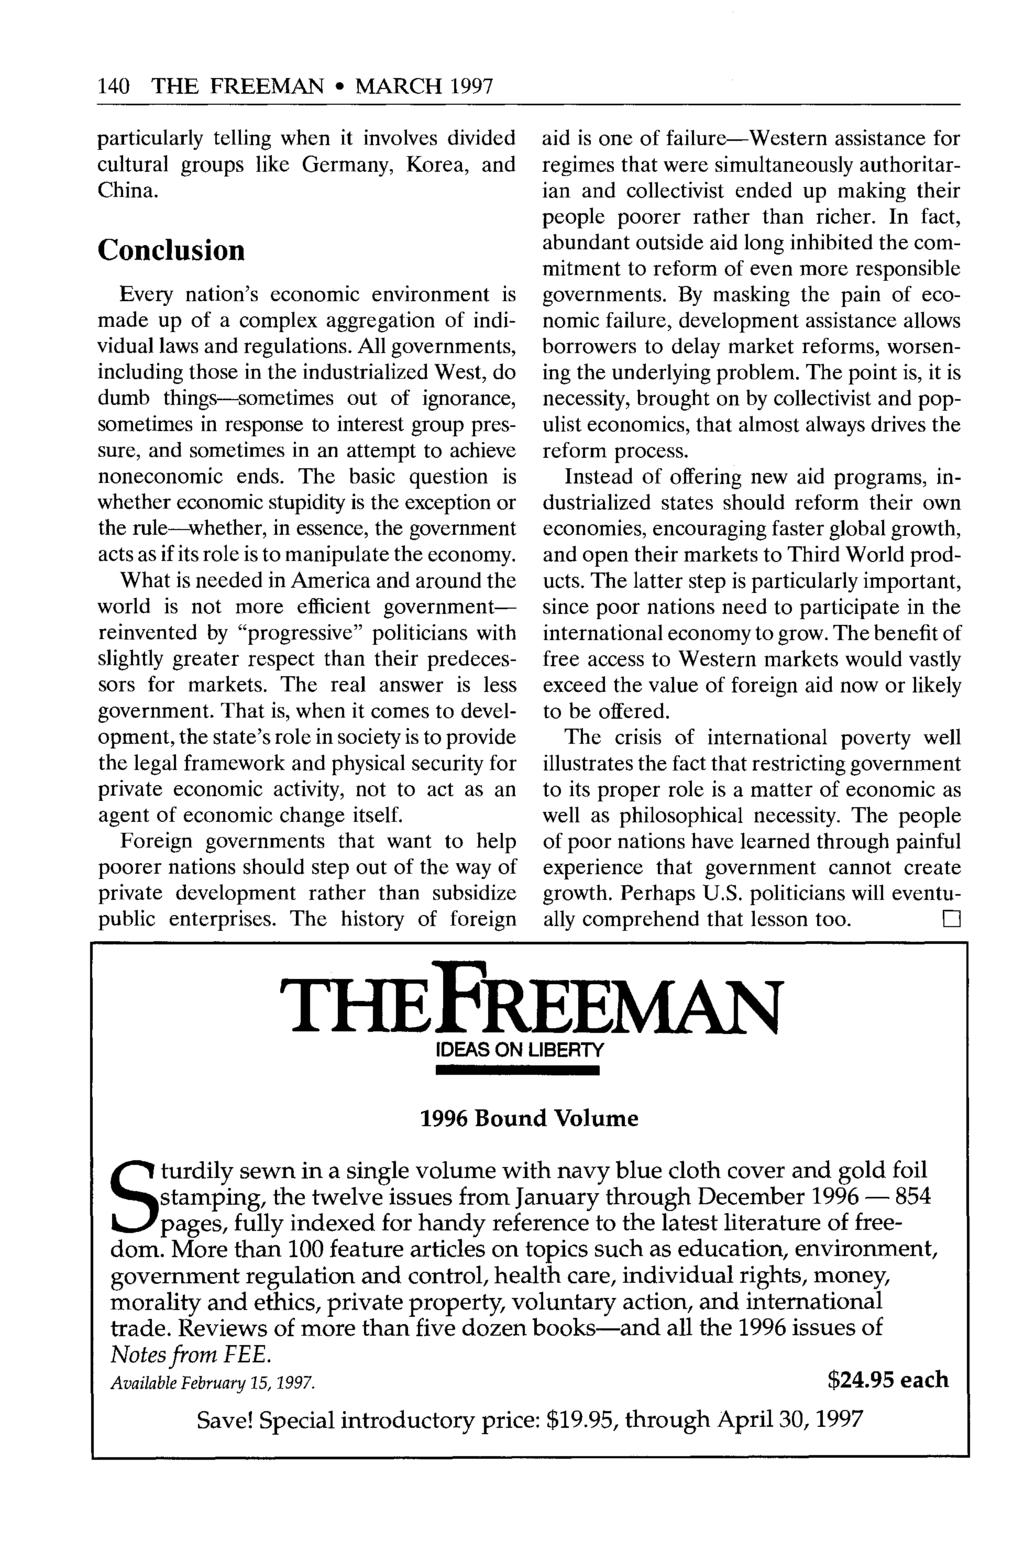 140 THE FREEMAN MARCH 1997 particularly telling when it involves divided cultural groups like Germany, Korea, and China.